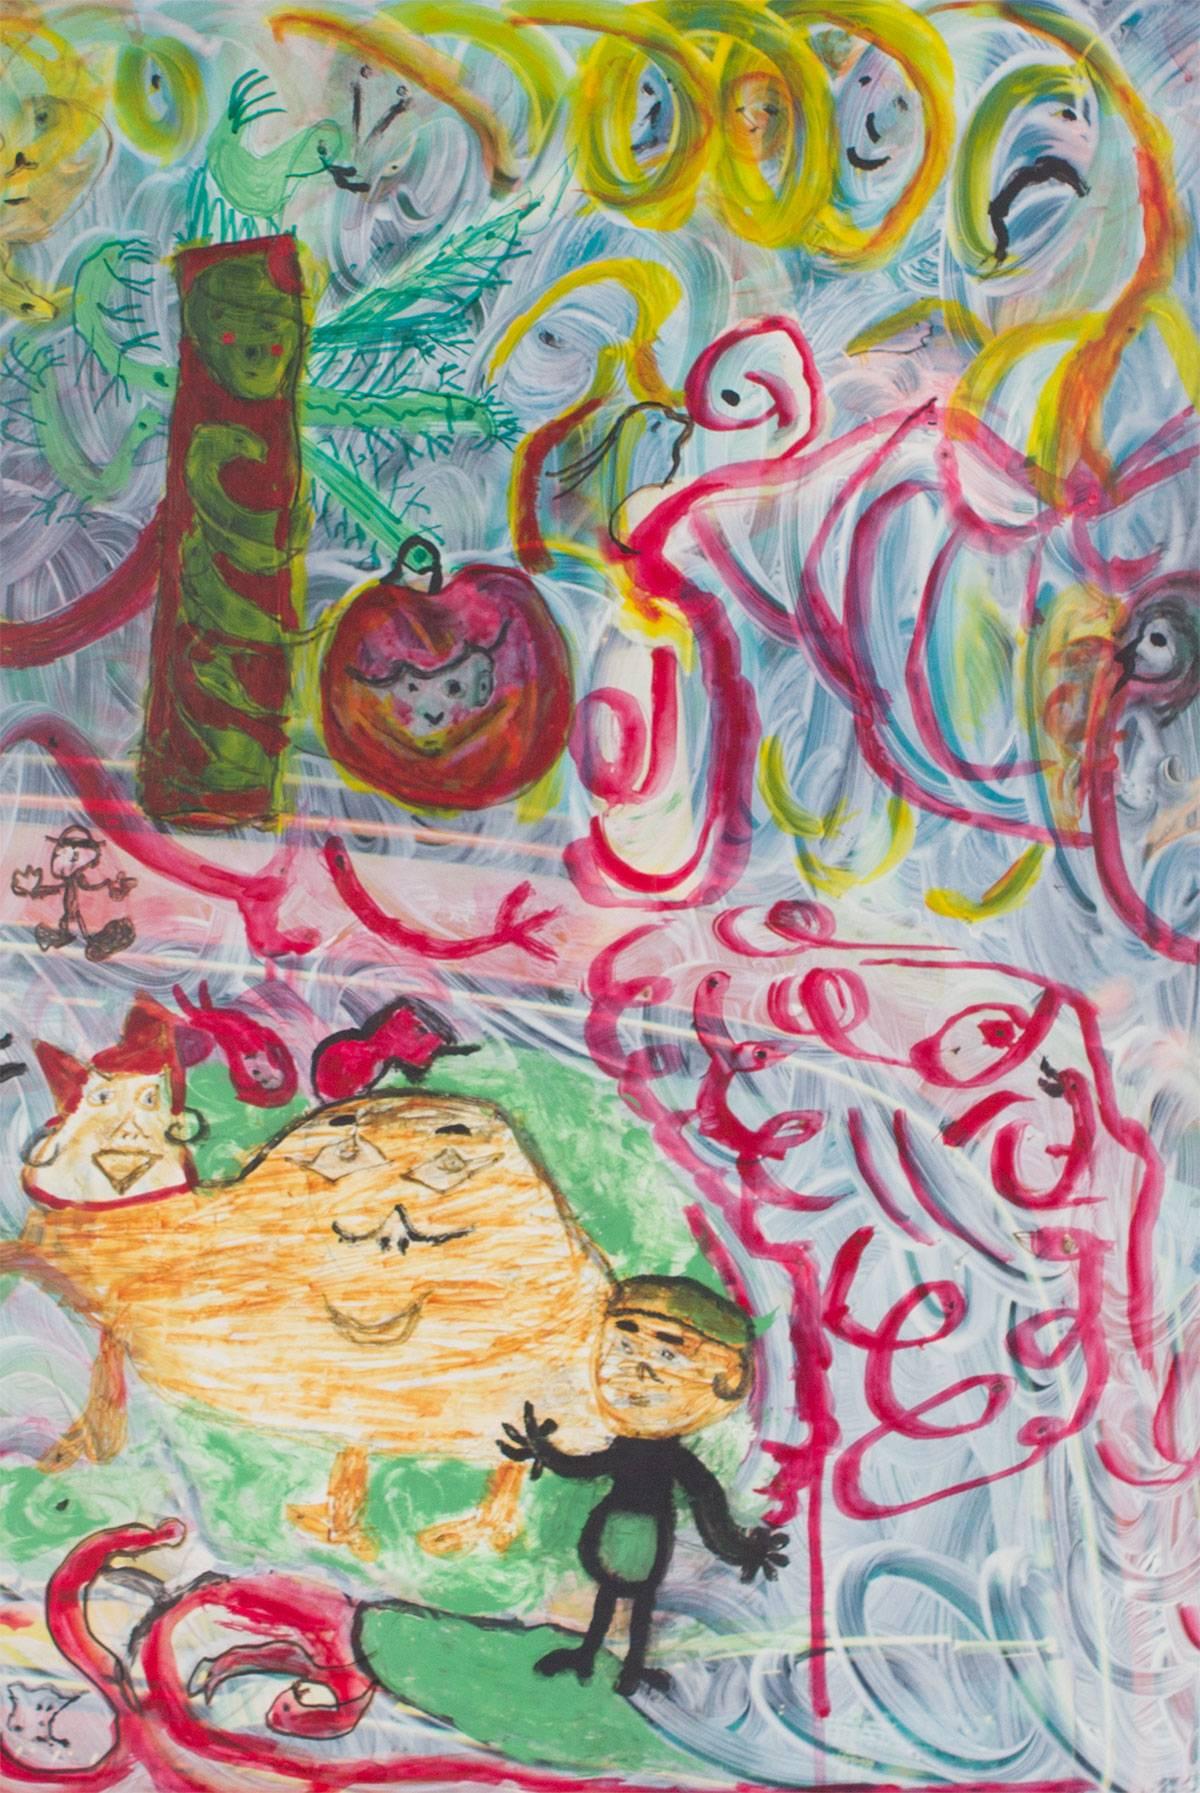 Untitled Acrylic and Marker Outsider Art Surrealist Dreamscape - Painting by Hilda Arvey